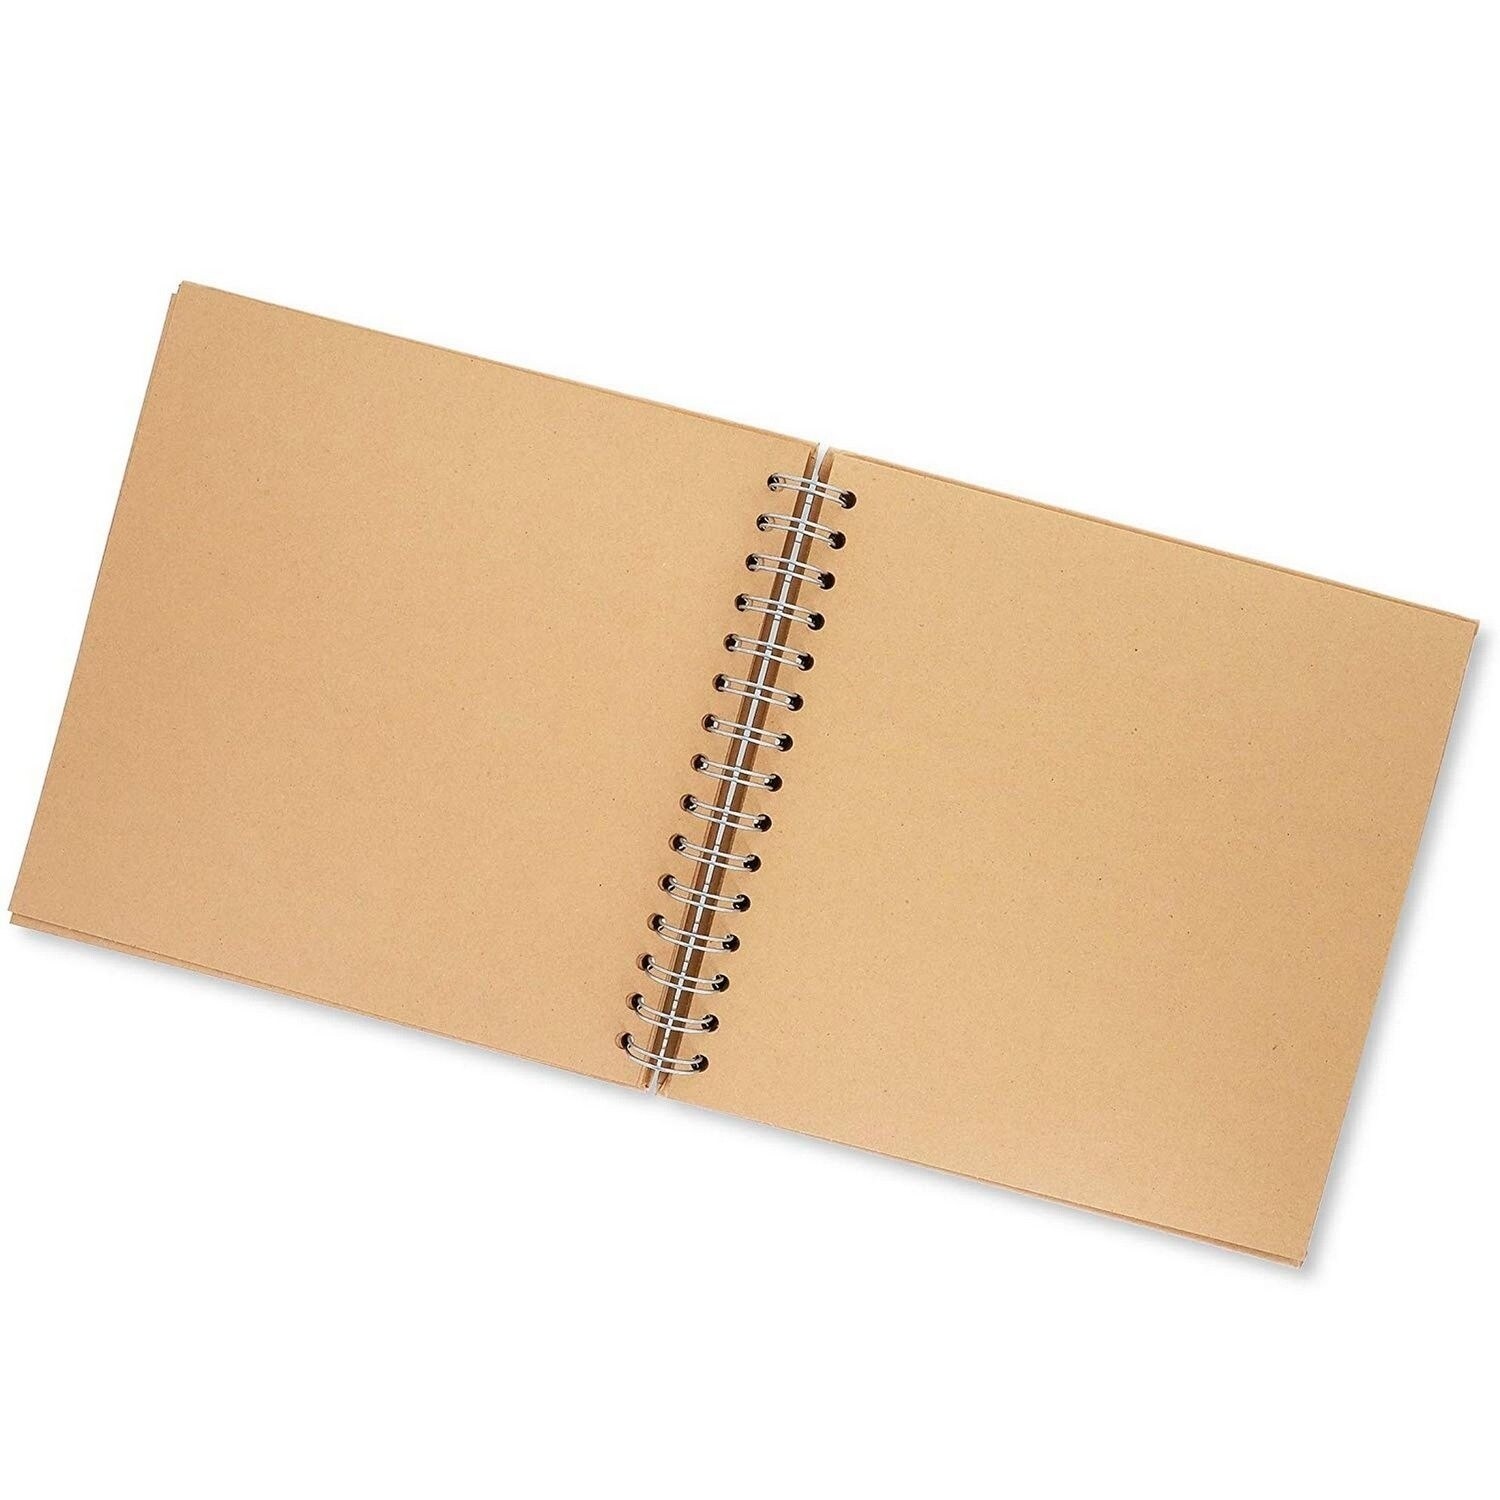 Hardcover Kraft Blank Page Scrapbook Photo Album Notebook, 100 pages,  12x12